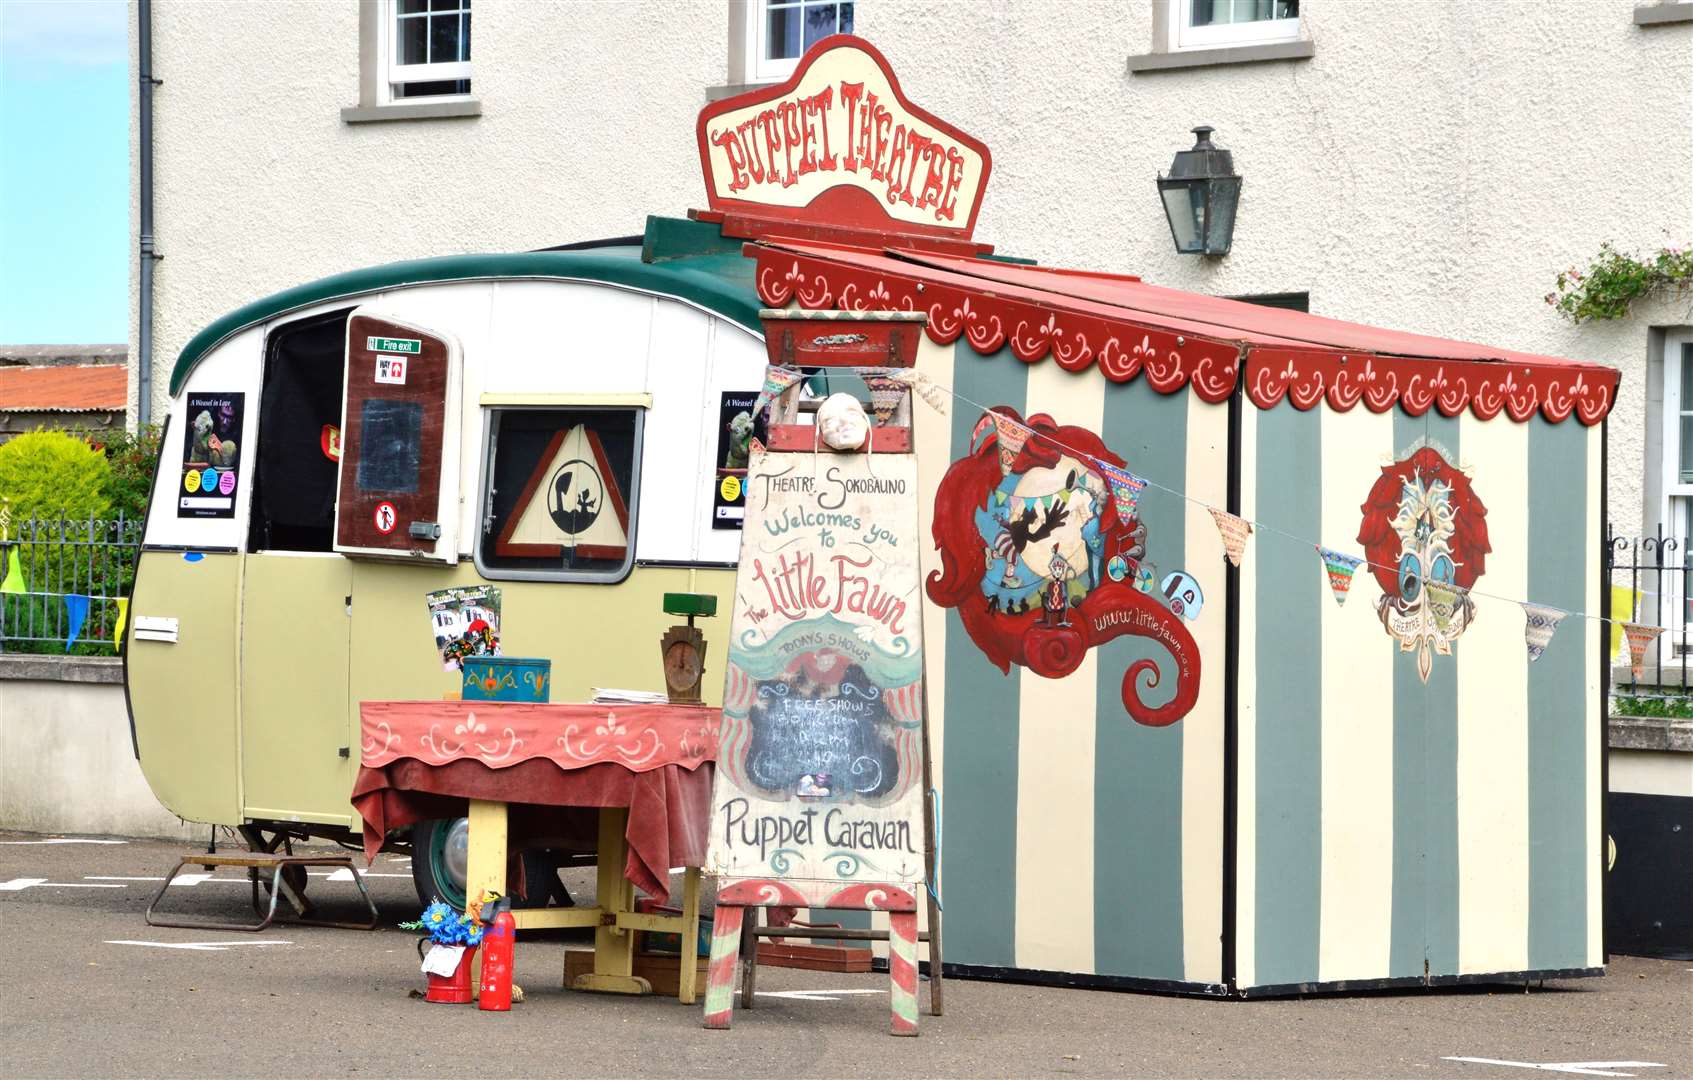 Little Fawn Caravan is coming to Lyth with its puppet theatre.